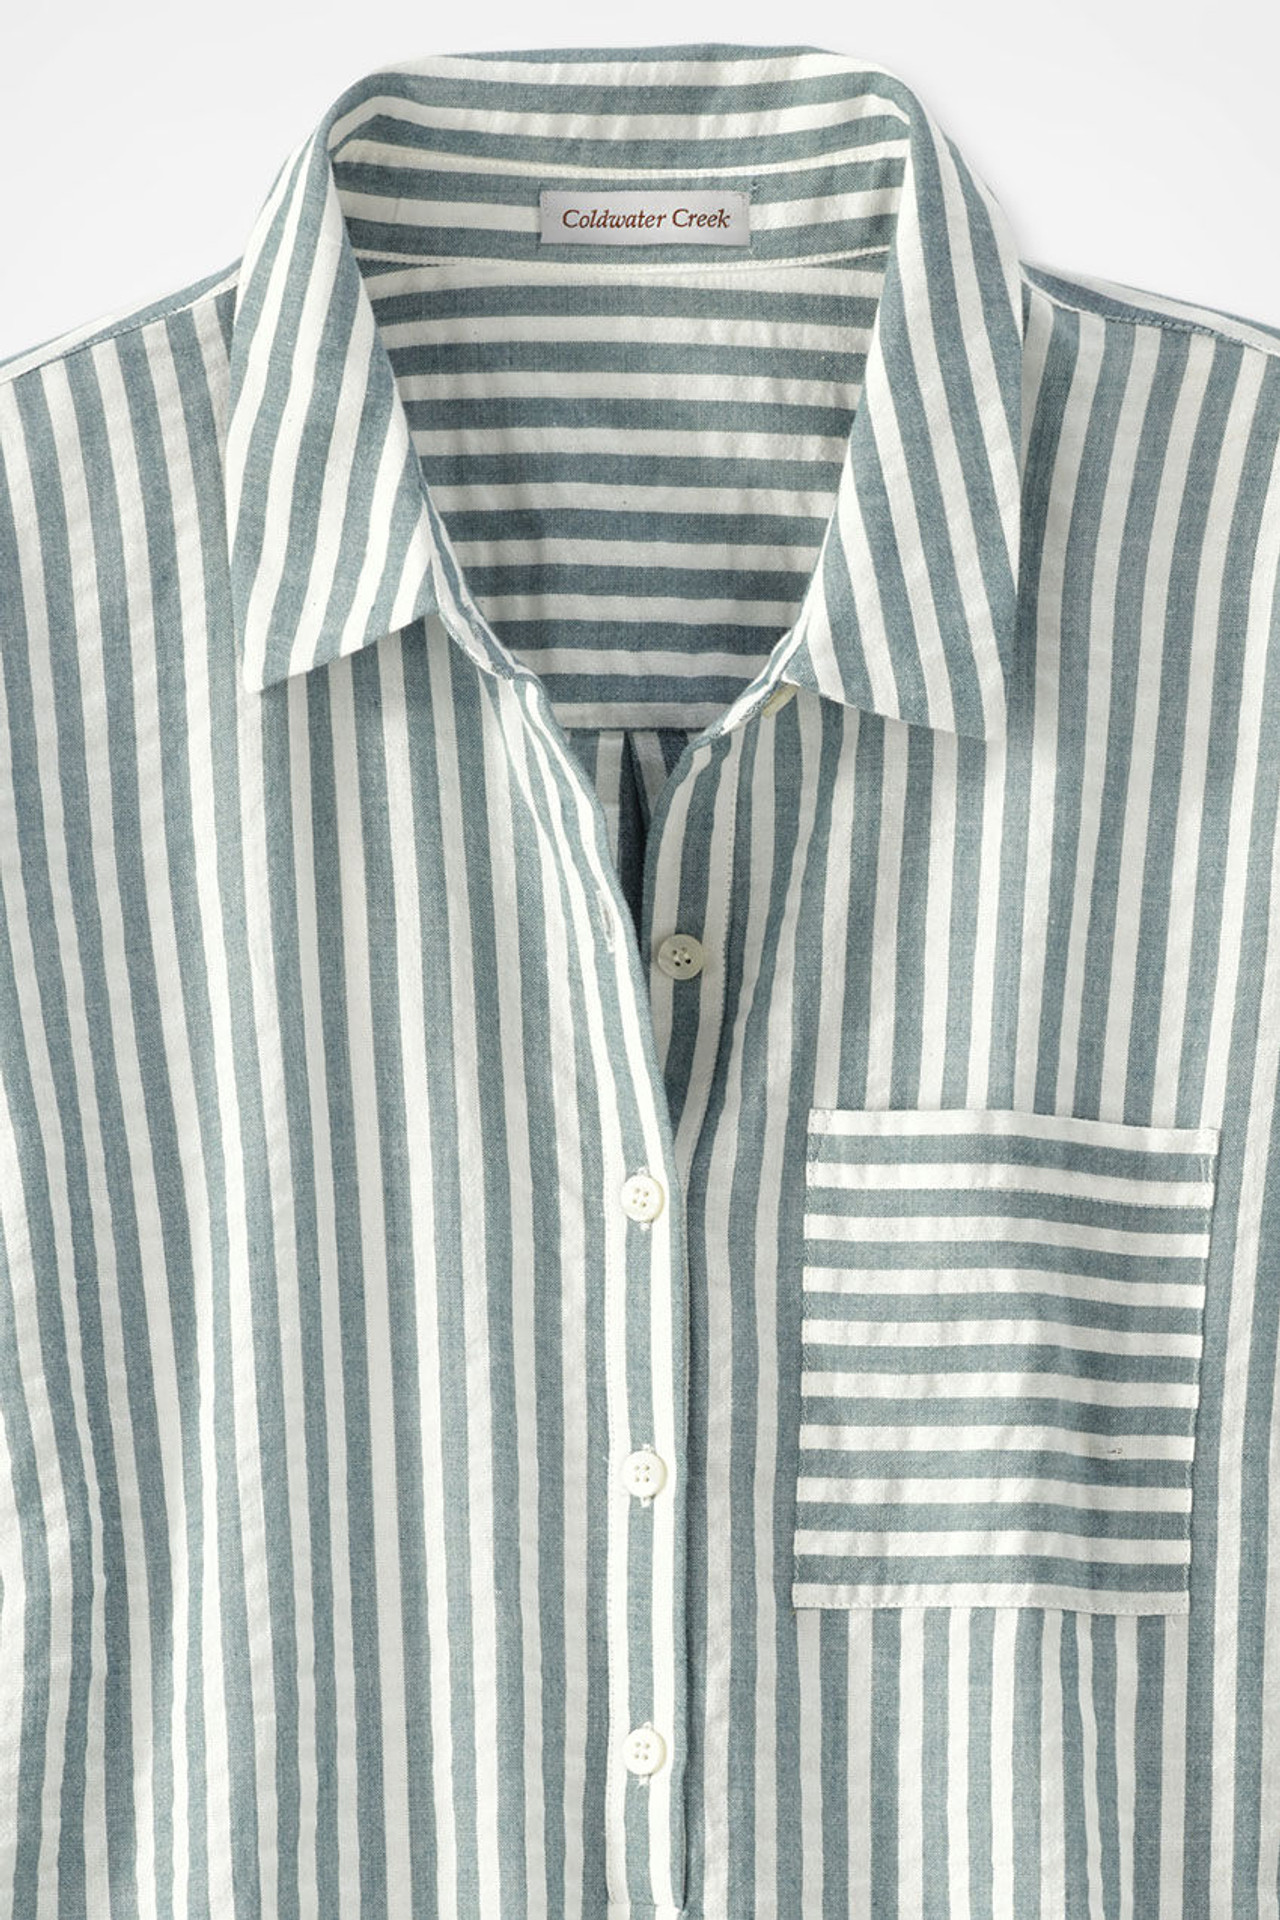 Crinkle Cotton Striped Long-Sleeve Shirt - Coldwater Creek